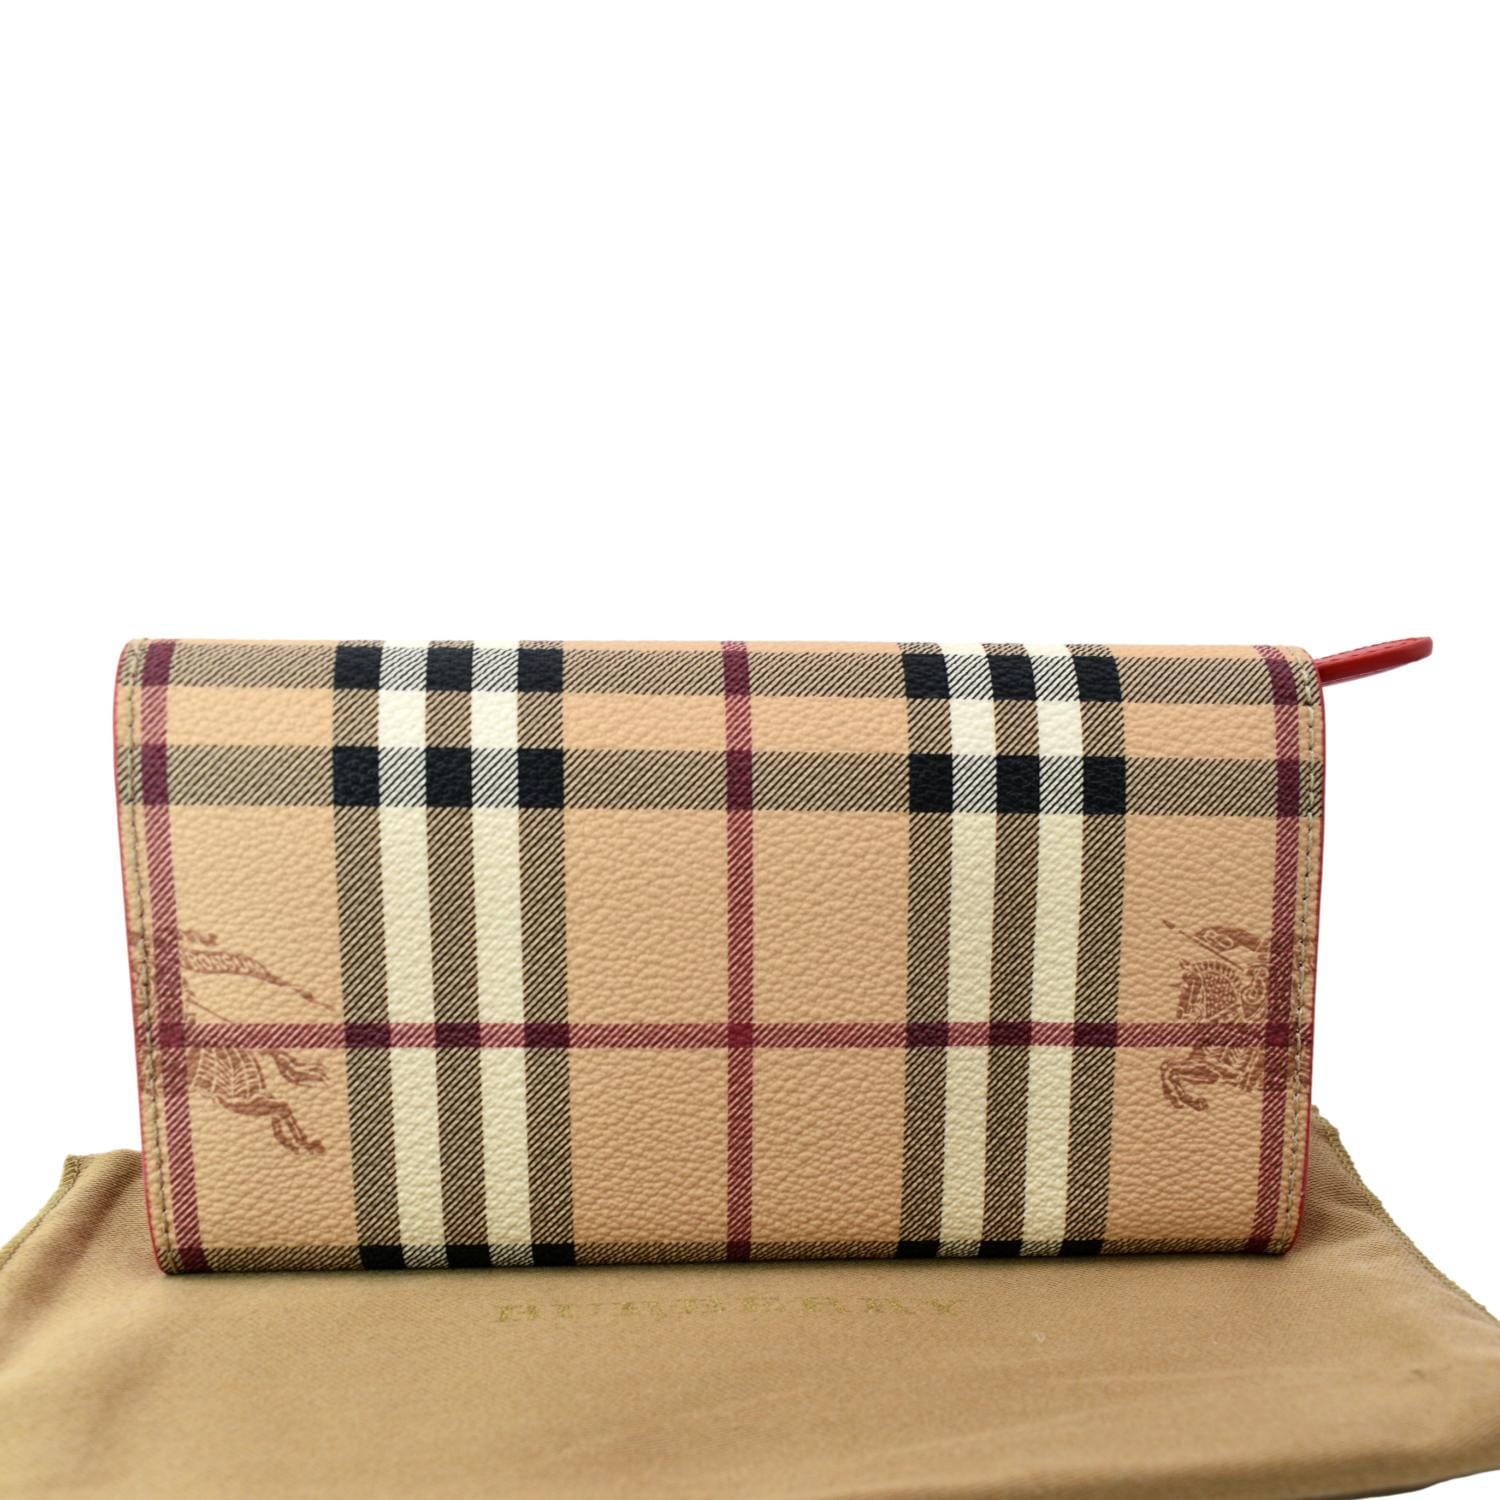 Burberry Women's Vintage House Check Classic Leather Purse Wallet with Dust Bag